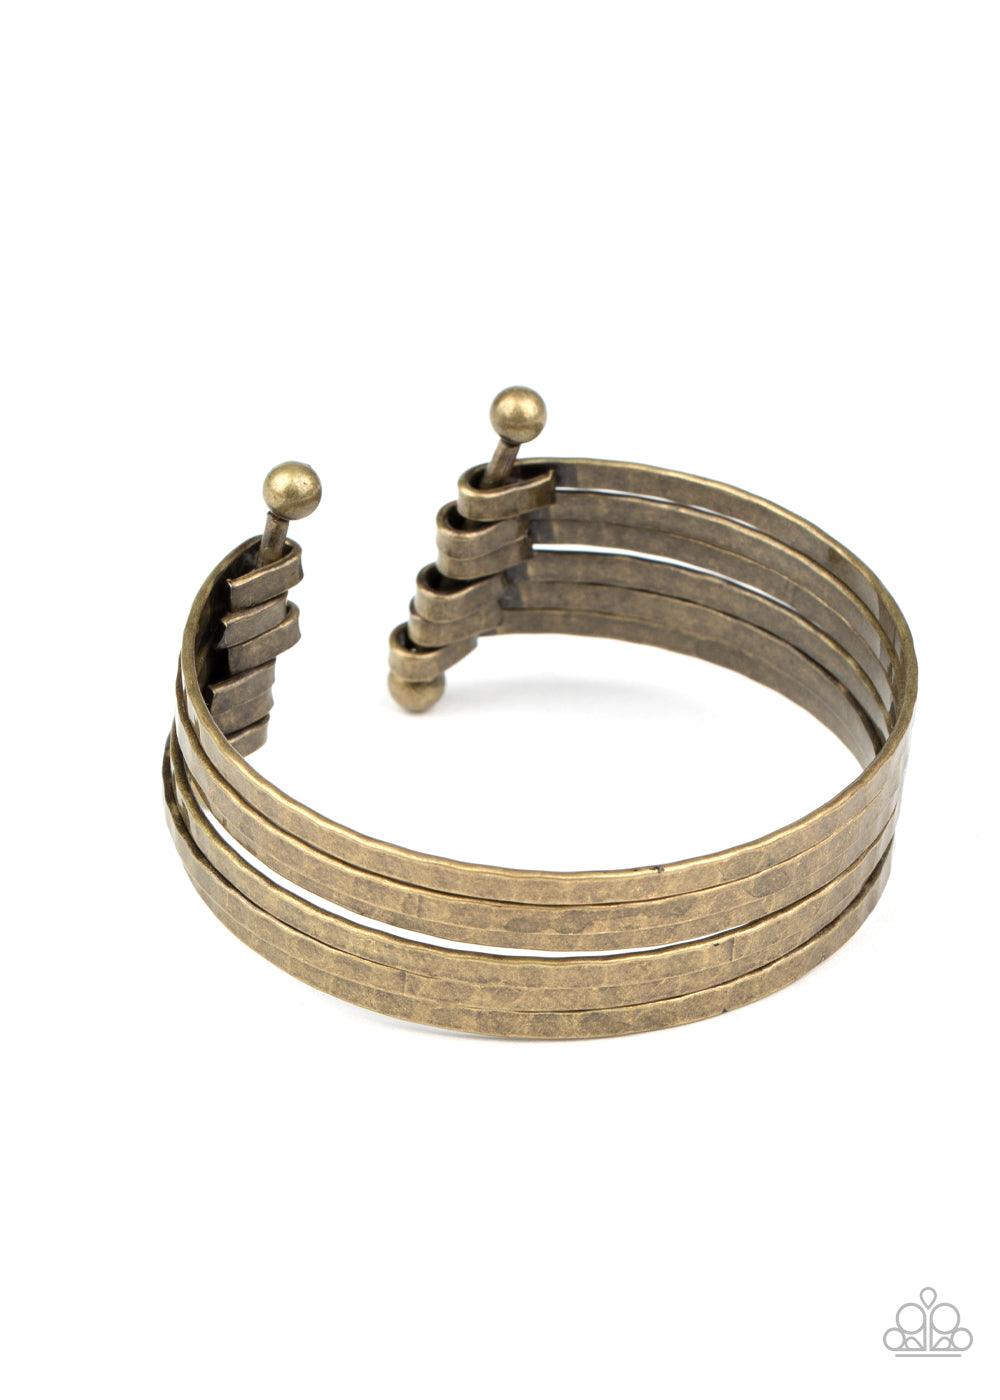 Paparazzi Accessories BAUBLE-Headed - Brass Brushed in an antiqued shimmer, hammered brass bars arc across the wrist. The flattened bars connect to two rod fittings, creating a trendy layered cuff. Sold as one individual bracelet. Jewelry